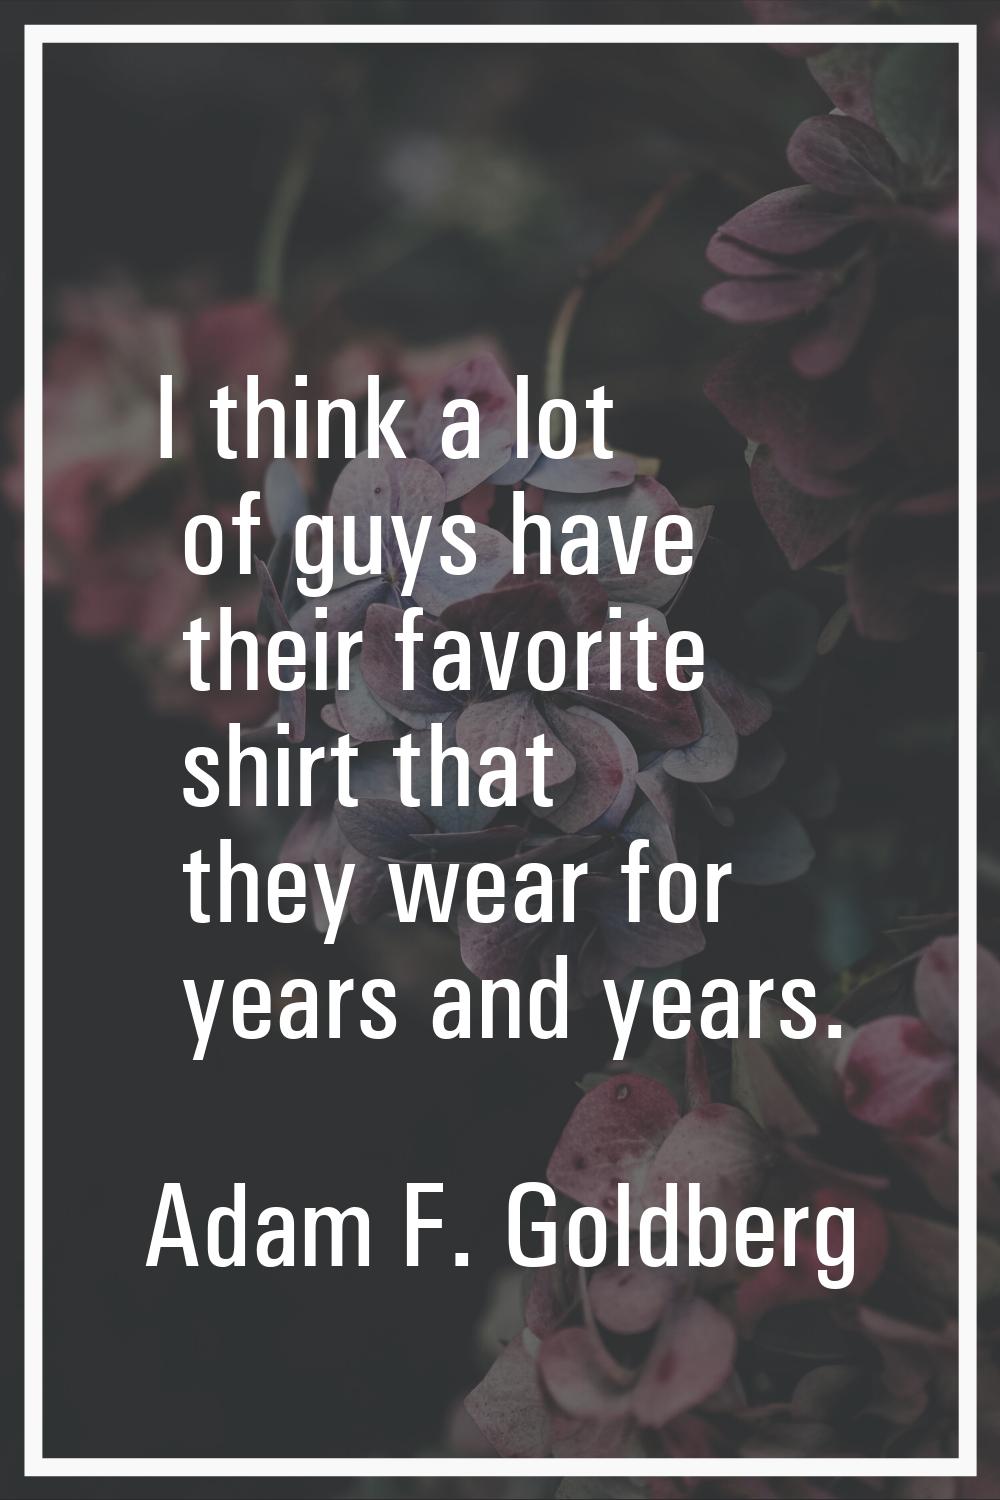 I think a lot of guys have their favorite shirt that they wear for years and years.